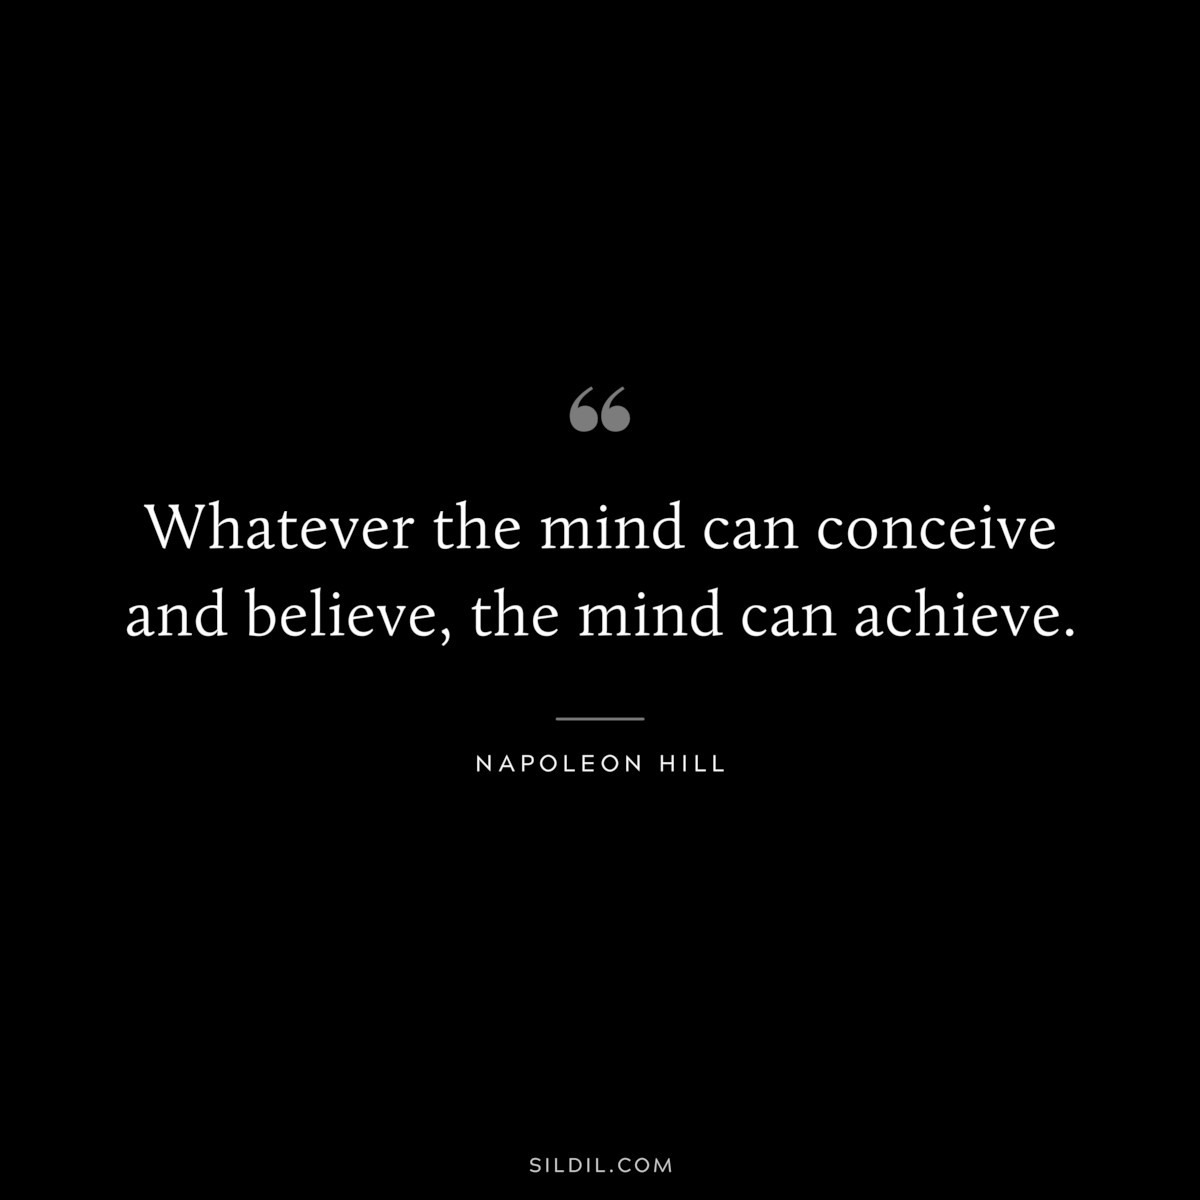 Whatever the mind can conceive and believe, the mind can achieve. ― Napoleon Hill